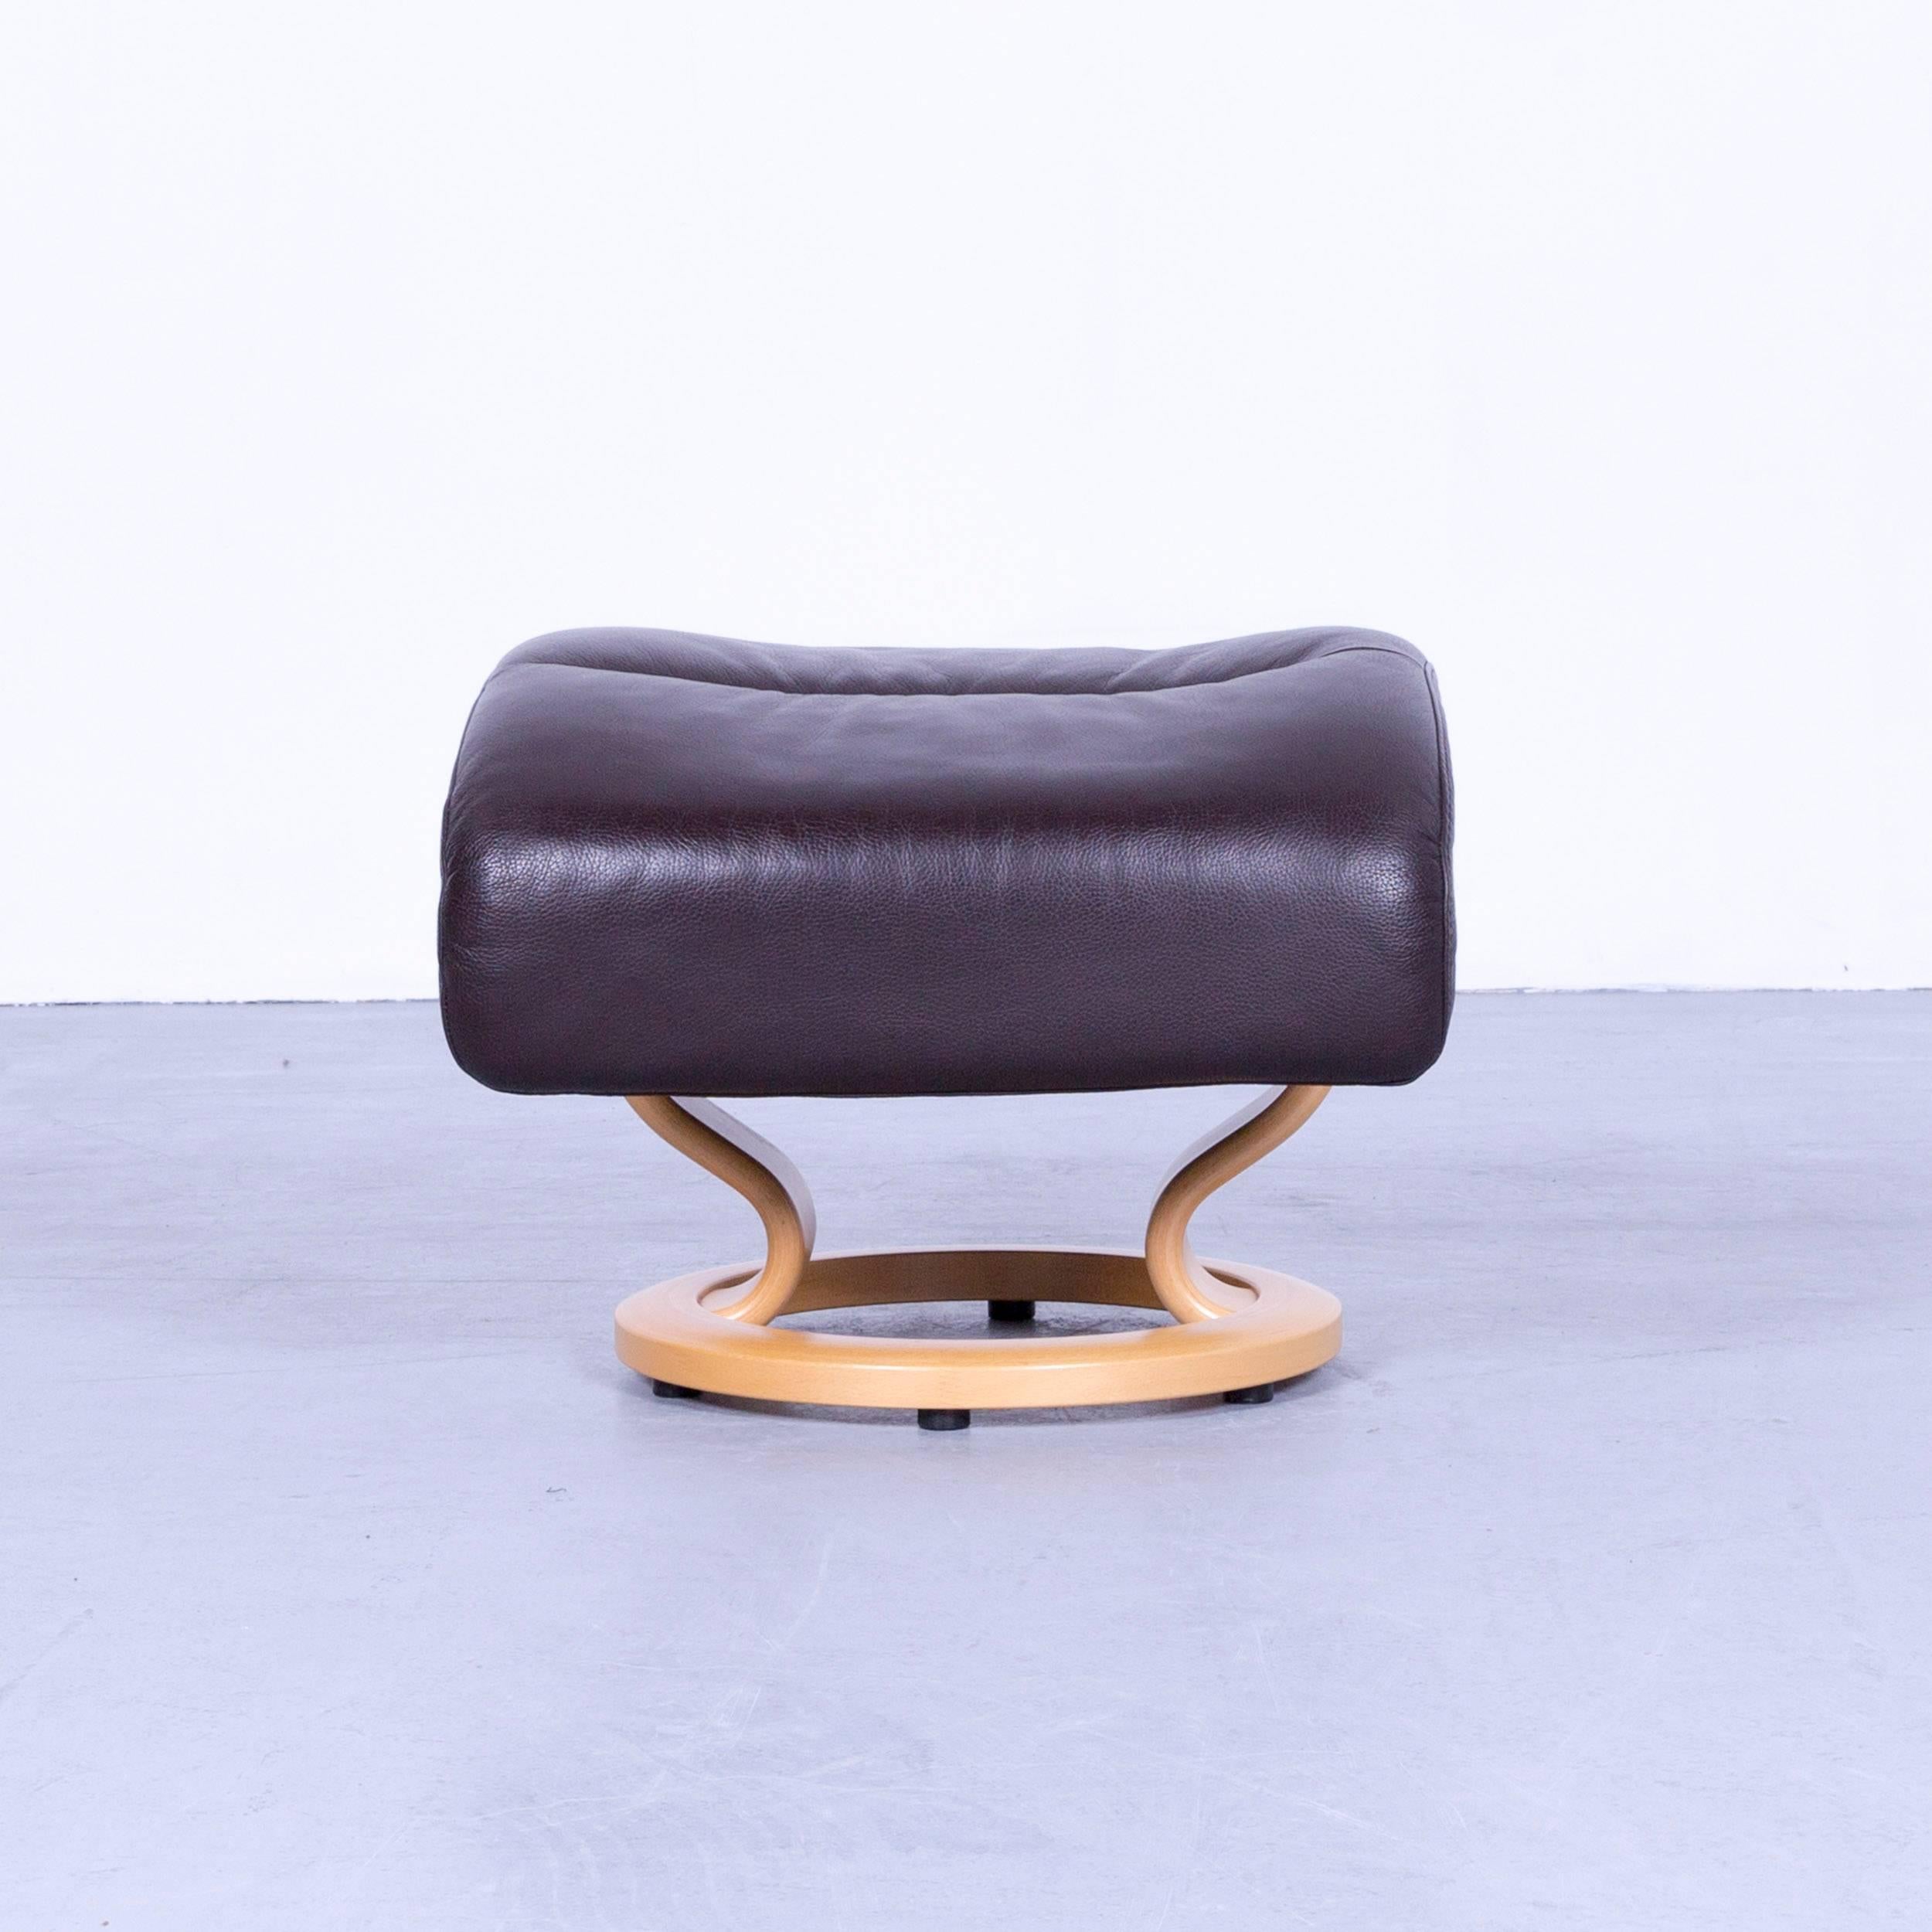 Ekornes Stressless Memphis footstool brown leather modern footrest designer wood, made for pure comfort and flexibility.